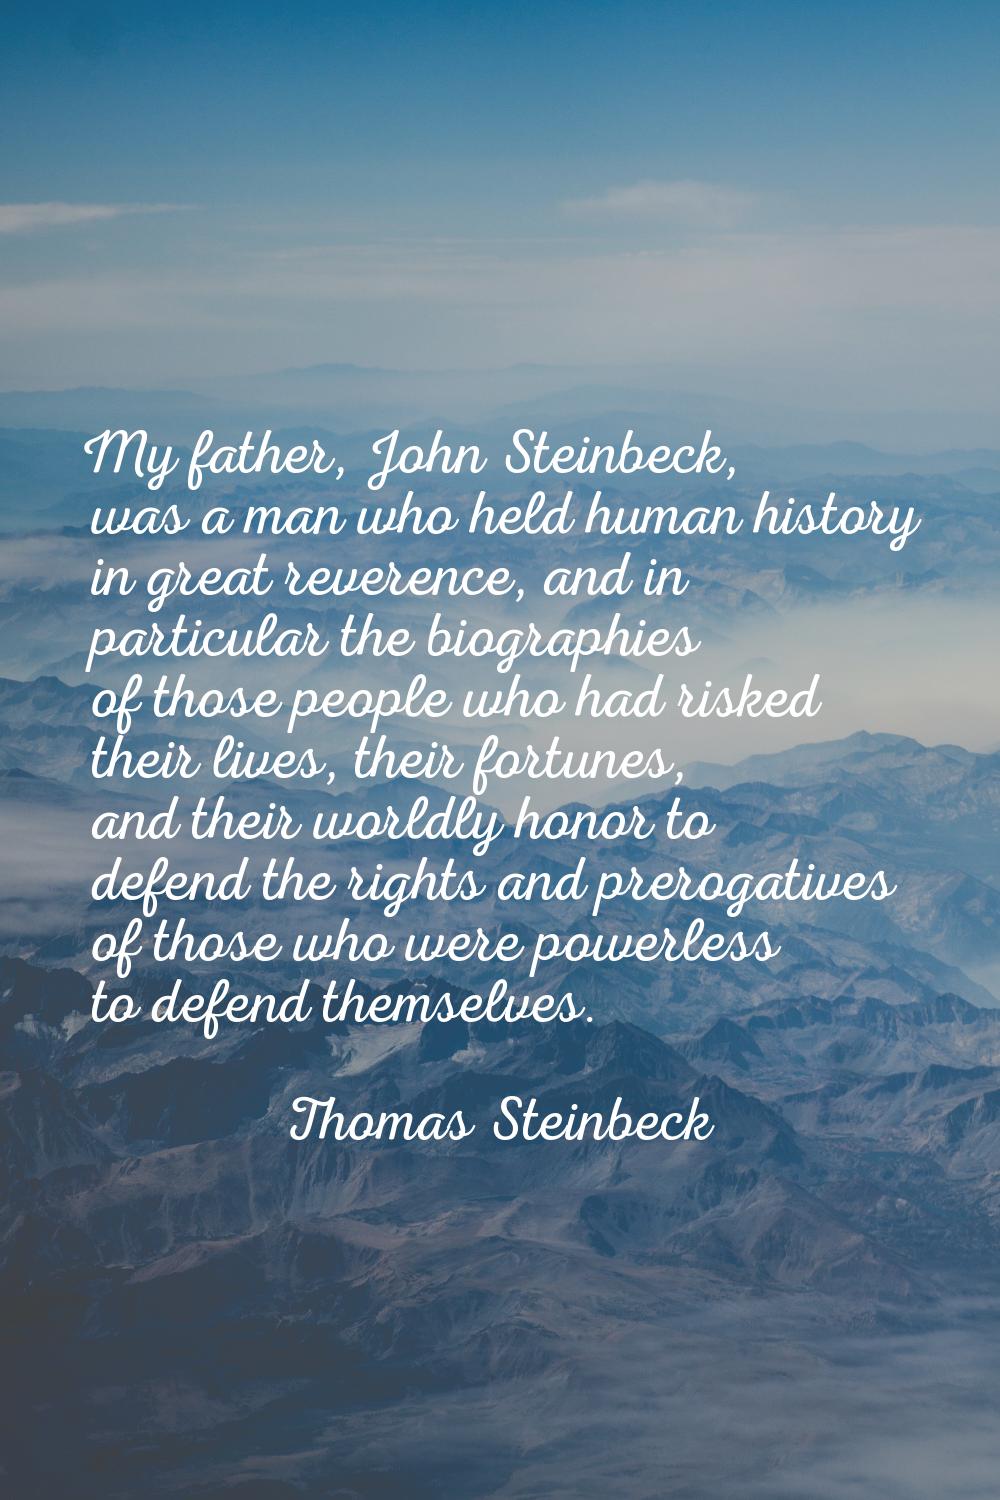 My father, John Steinbeck, was a man who held human history in great reverence, and in particular t